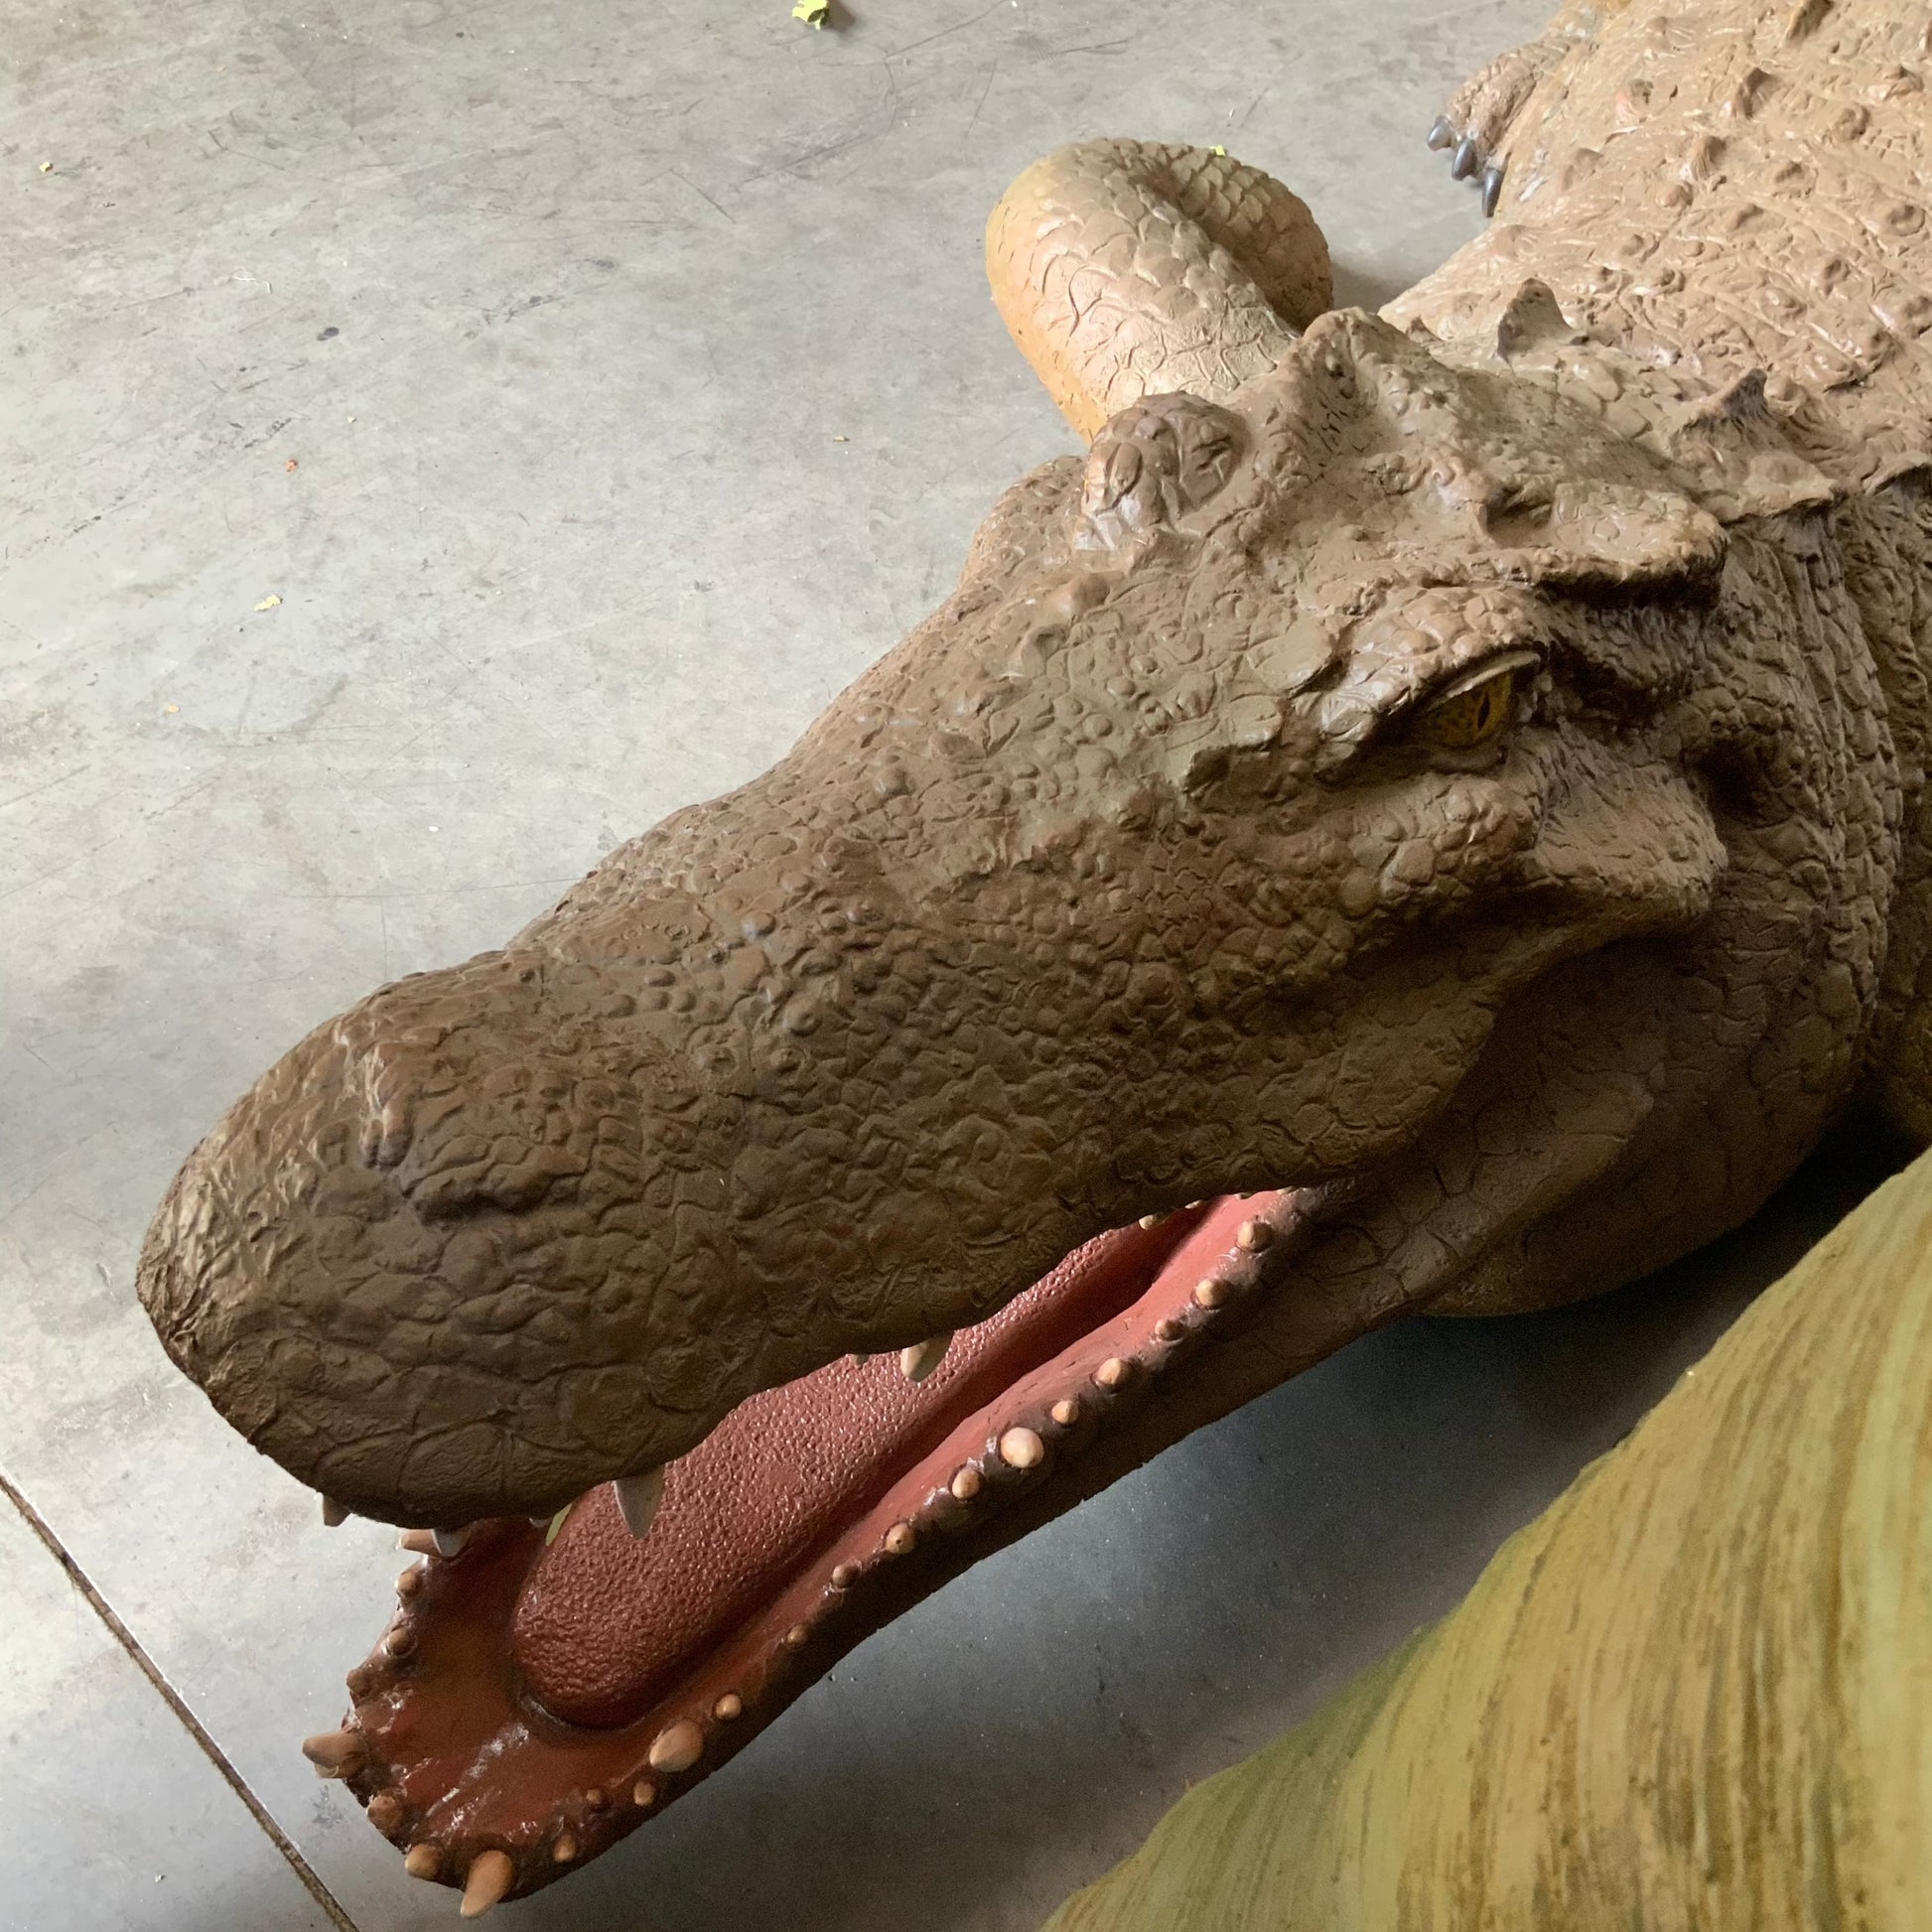 Large Crocodile Mouth Open Statue - LM Treasures Prop Rentals 